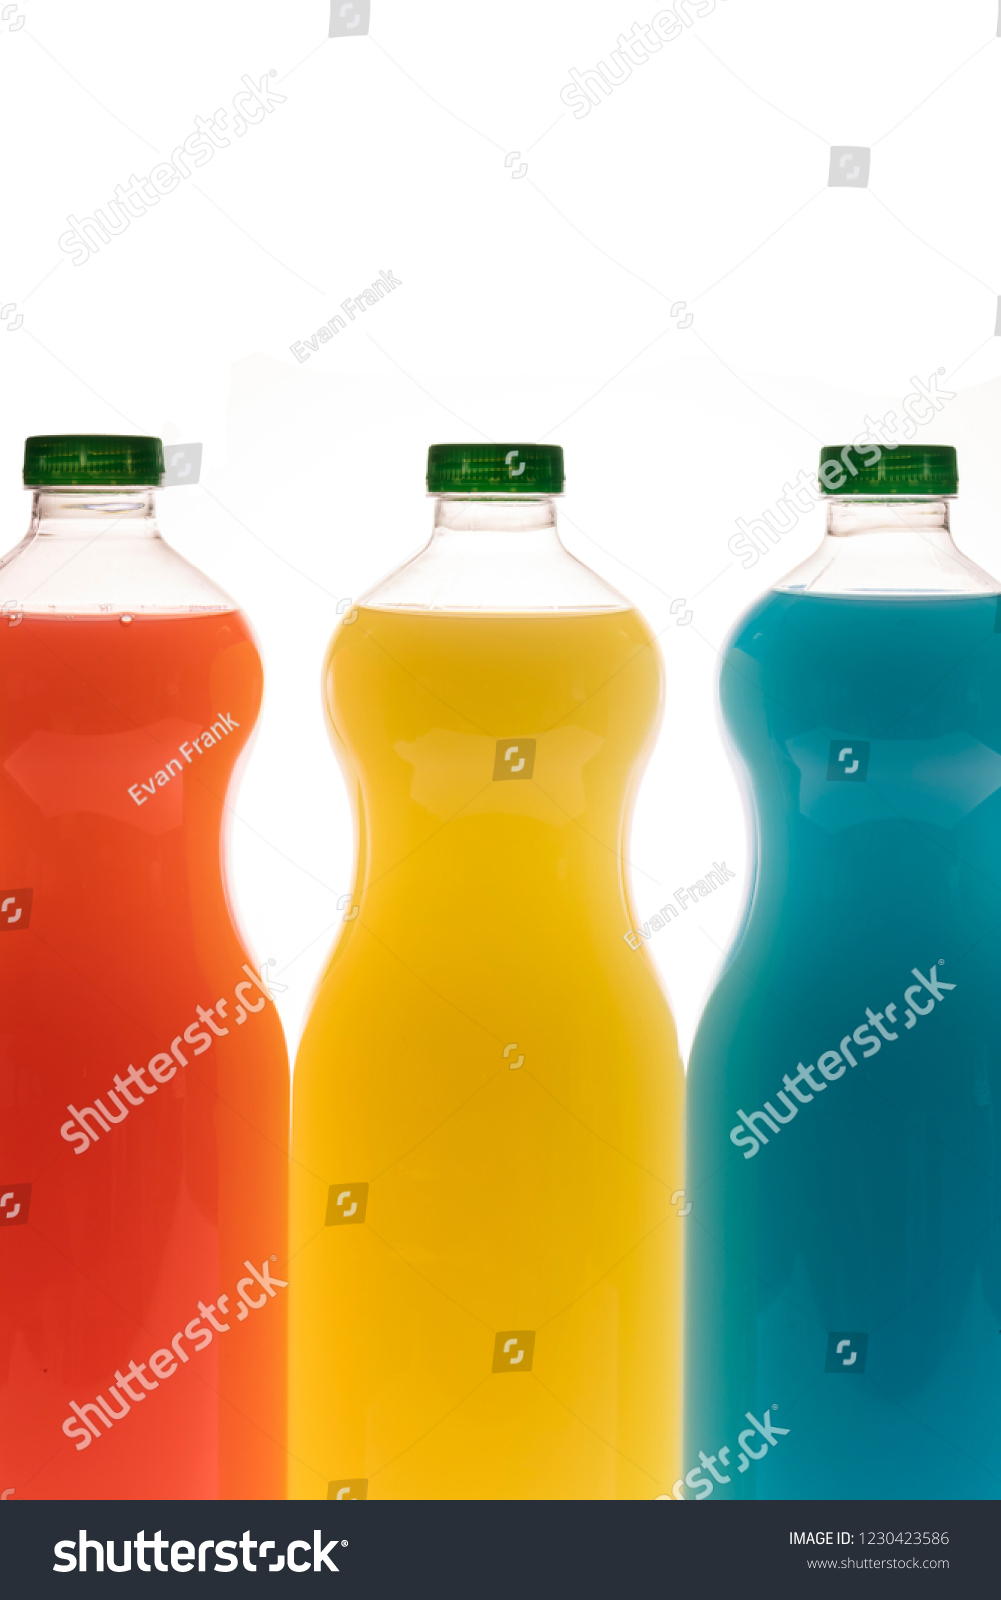 
Bottles of different flavored juices, watermelon, pineapple and tropical flavor isolated on white background #1230423586